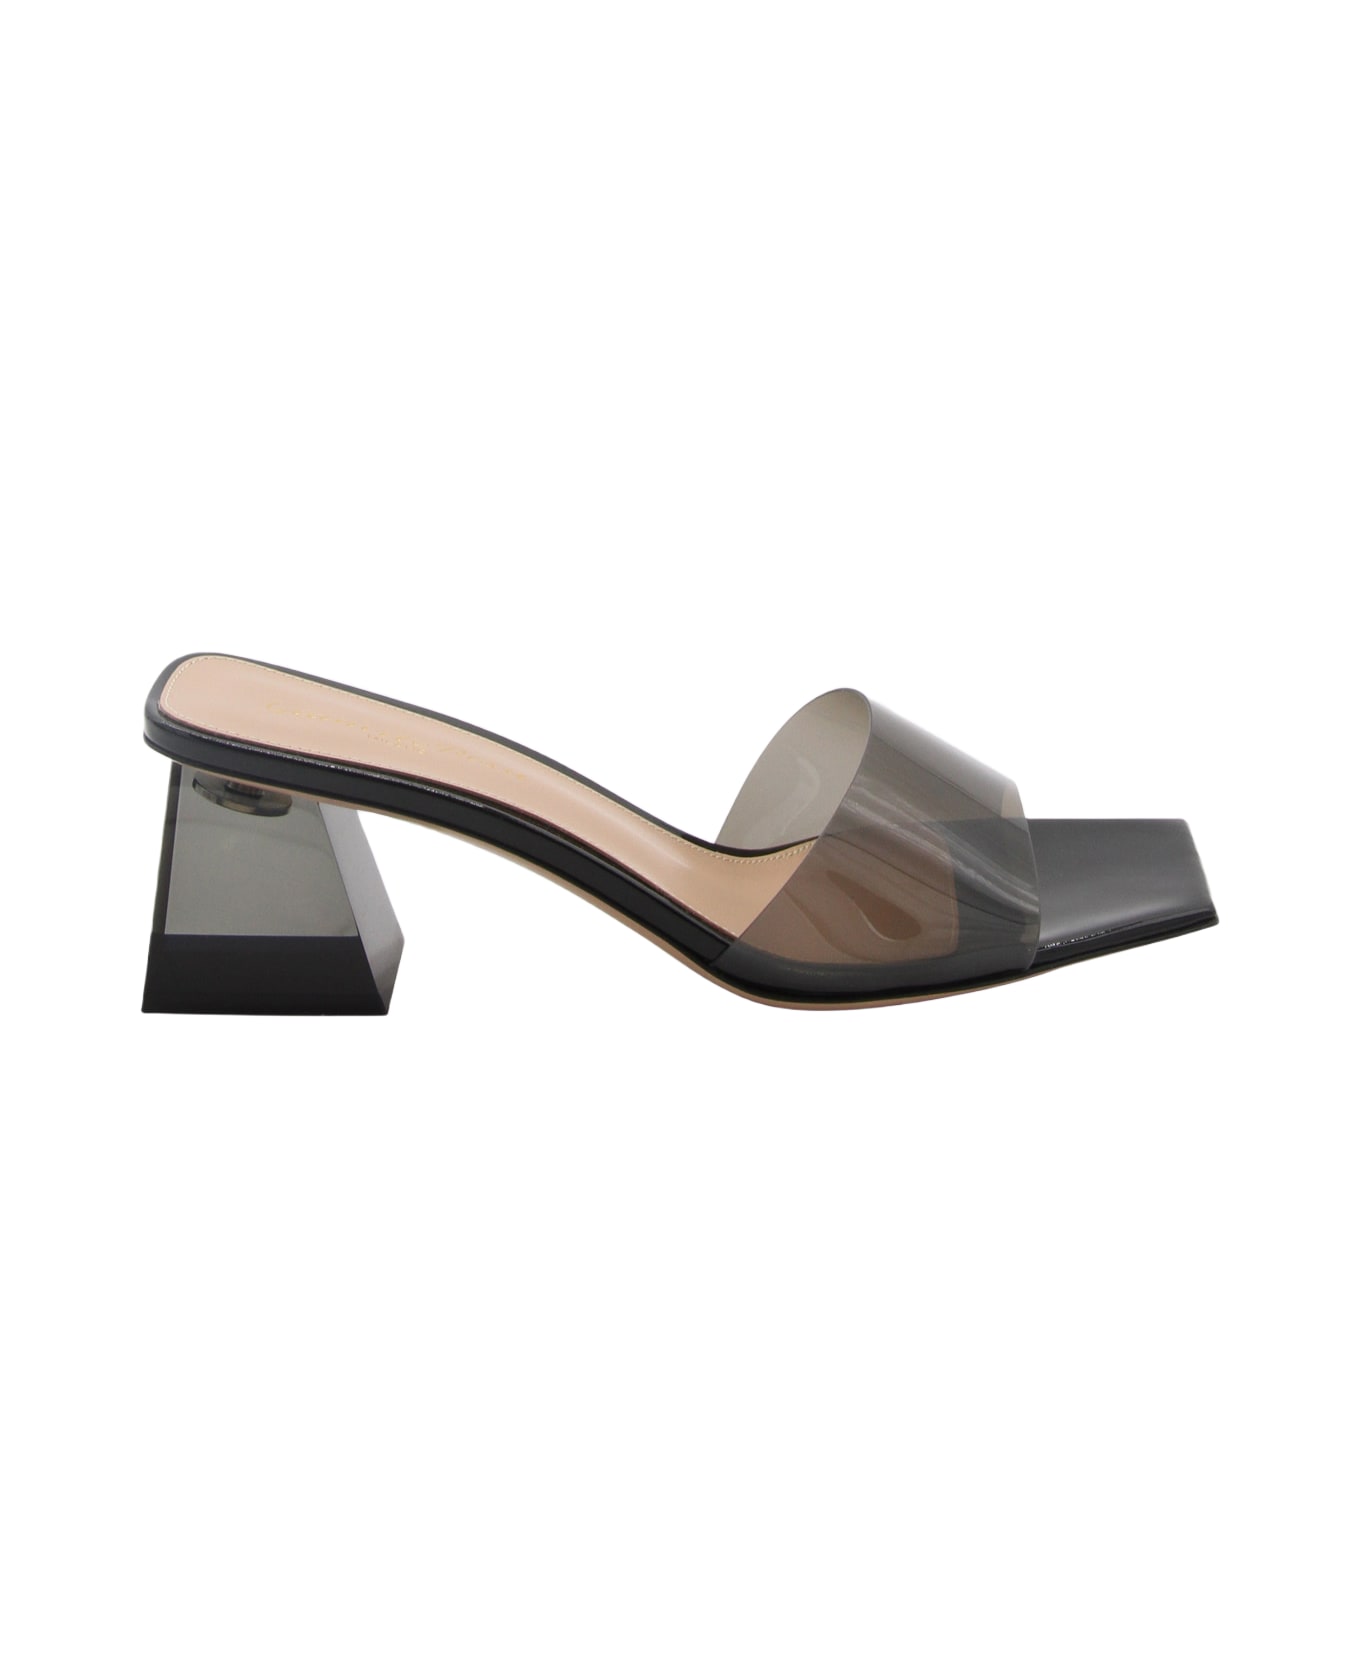 Gianvito Rossi Fume And Black Pvc And Leather Cosmic Sandals - FUME/BLACK